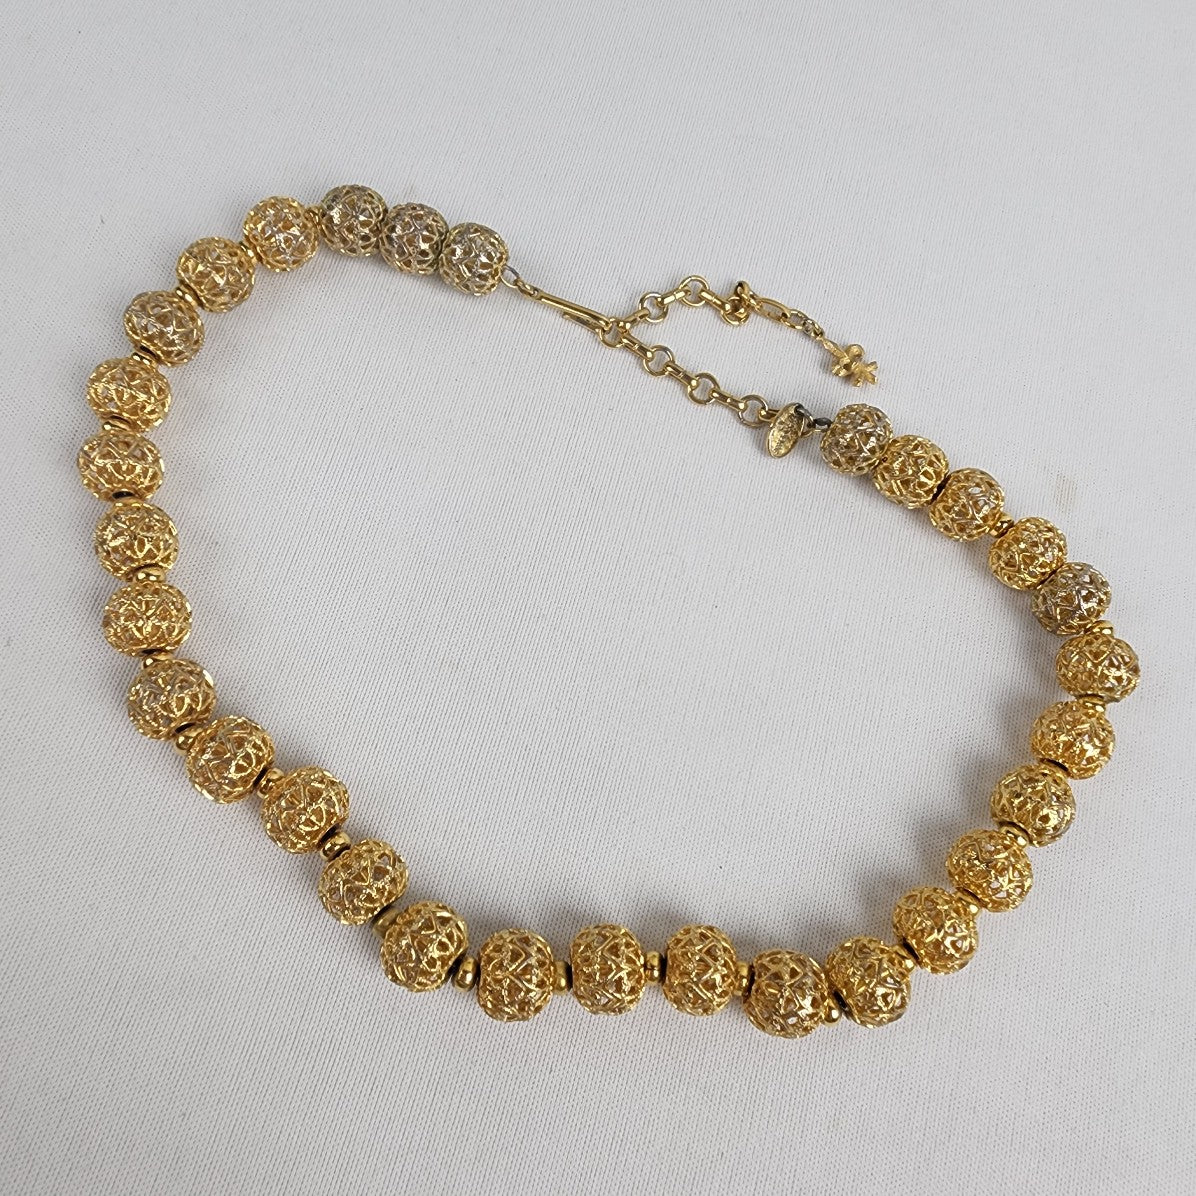 Vintage Vendome Gold Tone Carved Beaded Chain Necklace